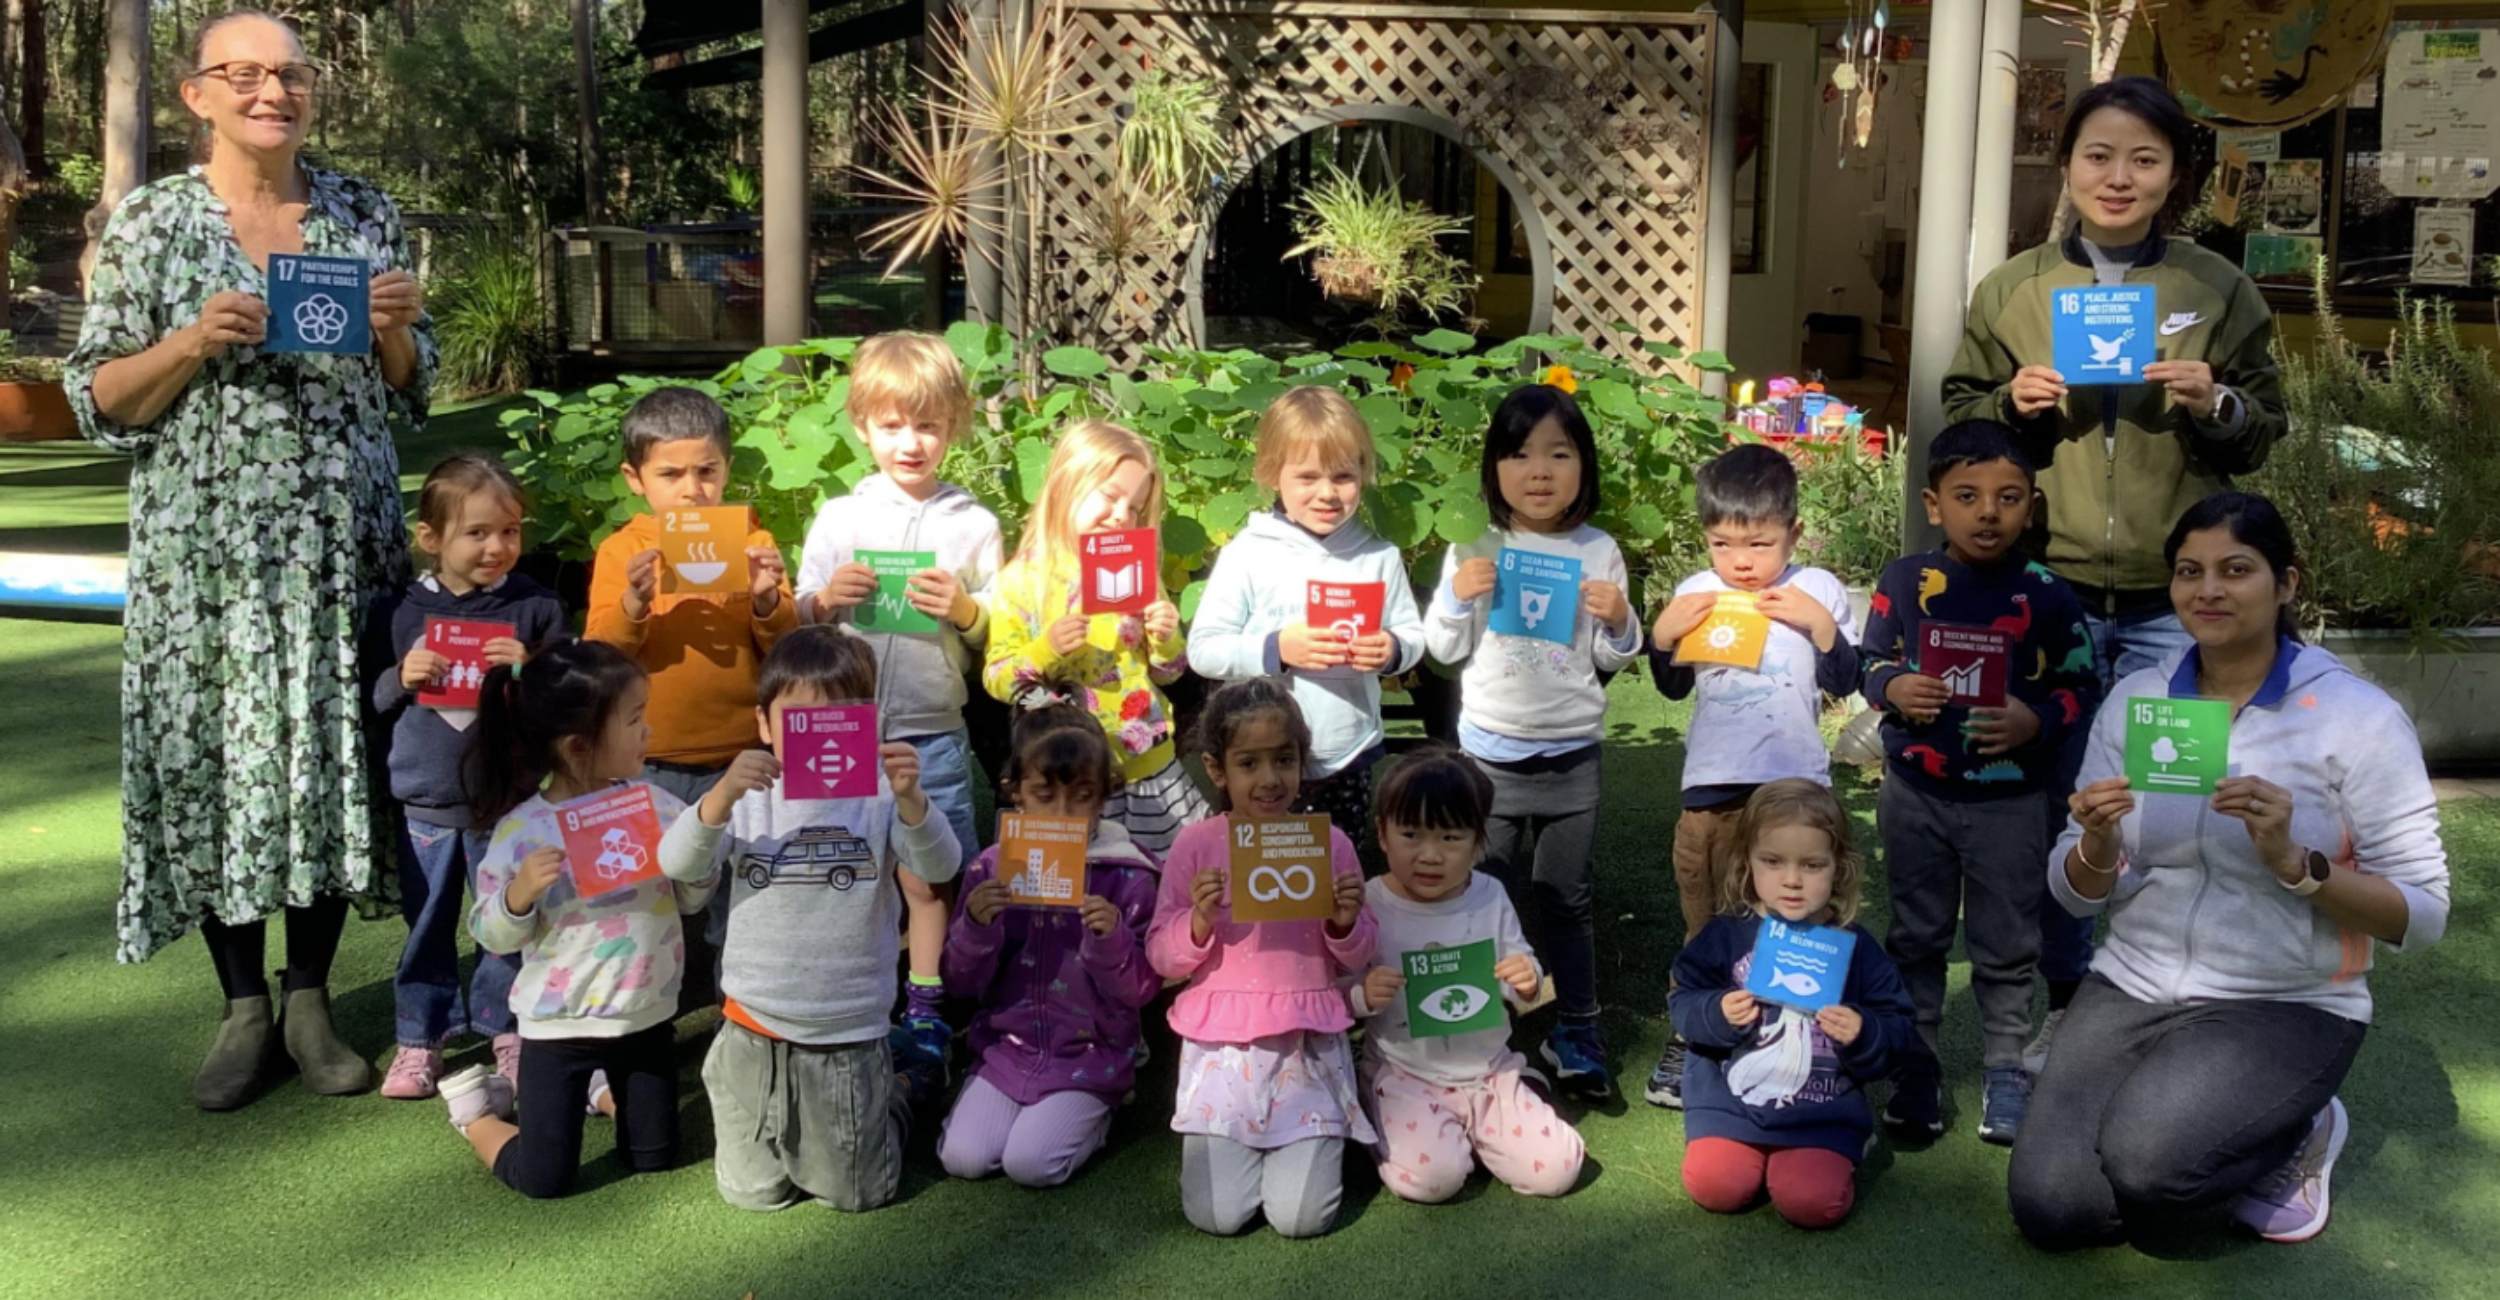 This image shows a group of early childhood attendees holding SDG banners